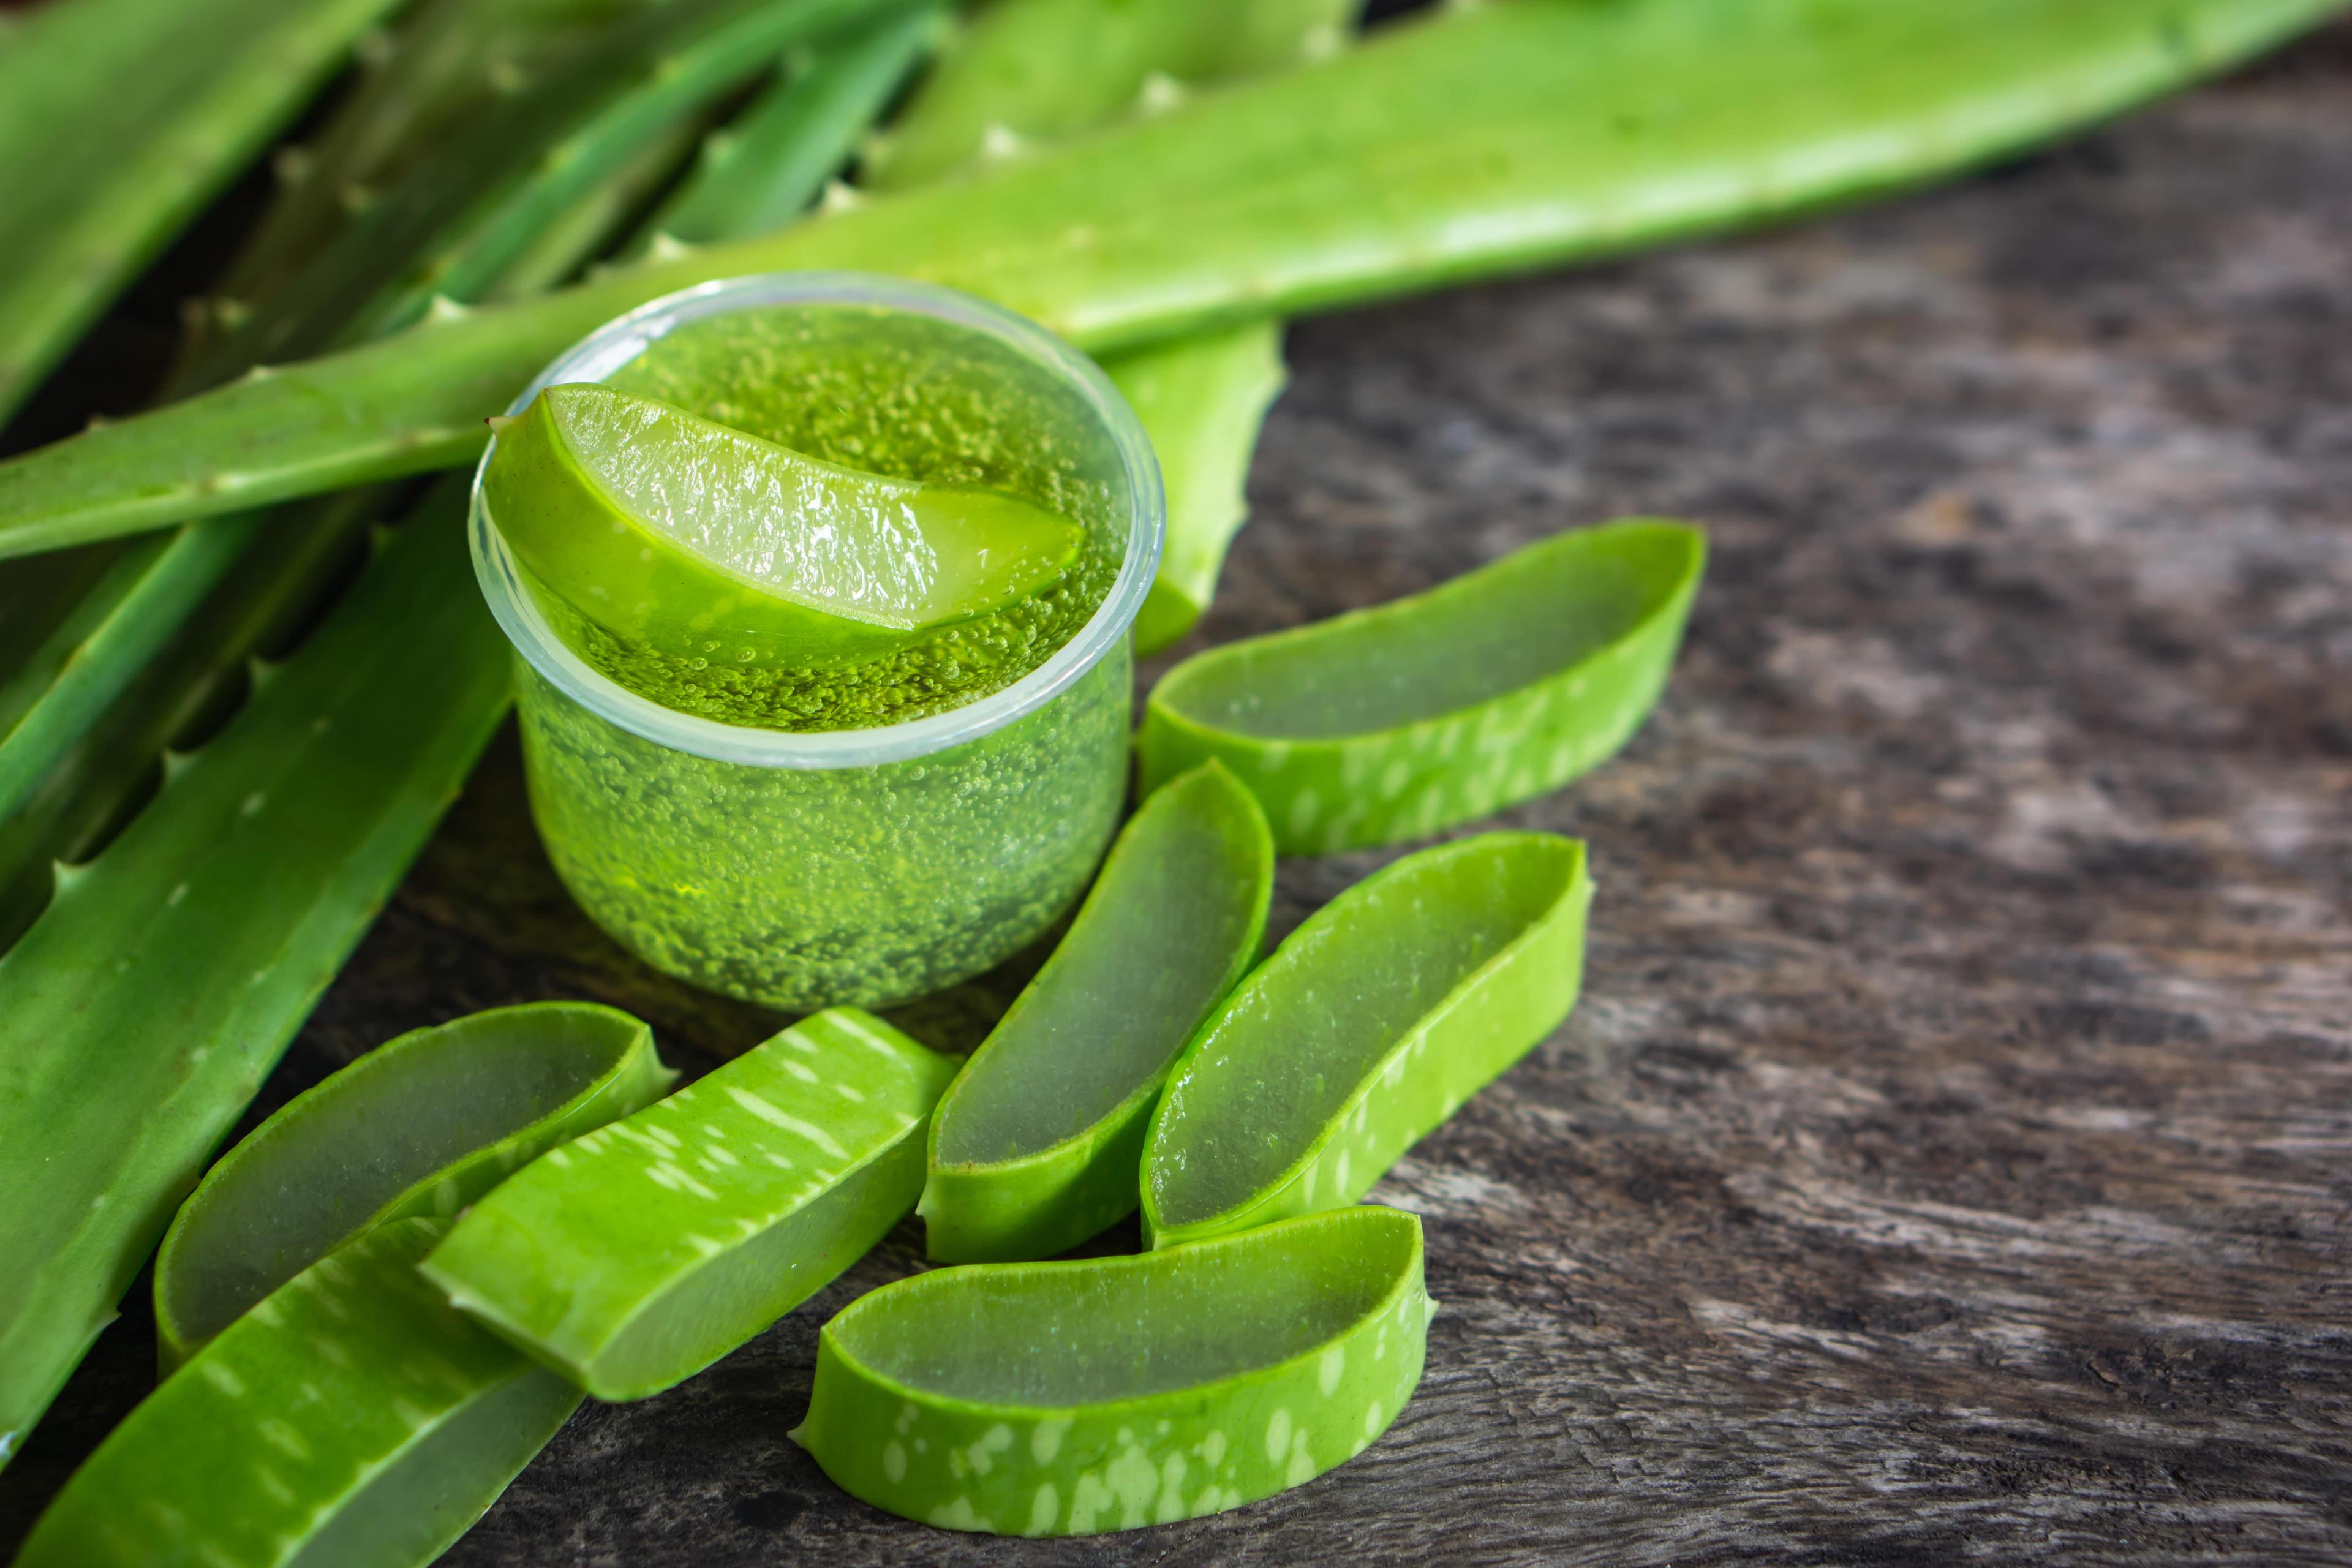 What are The Amazing Aloe Vera Benefits and Uses for Health?